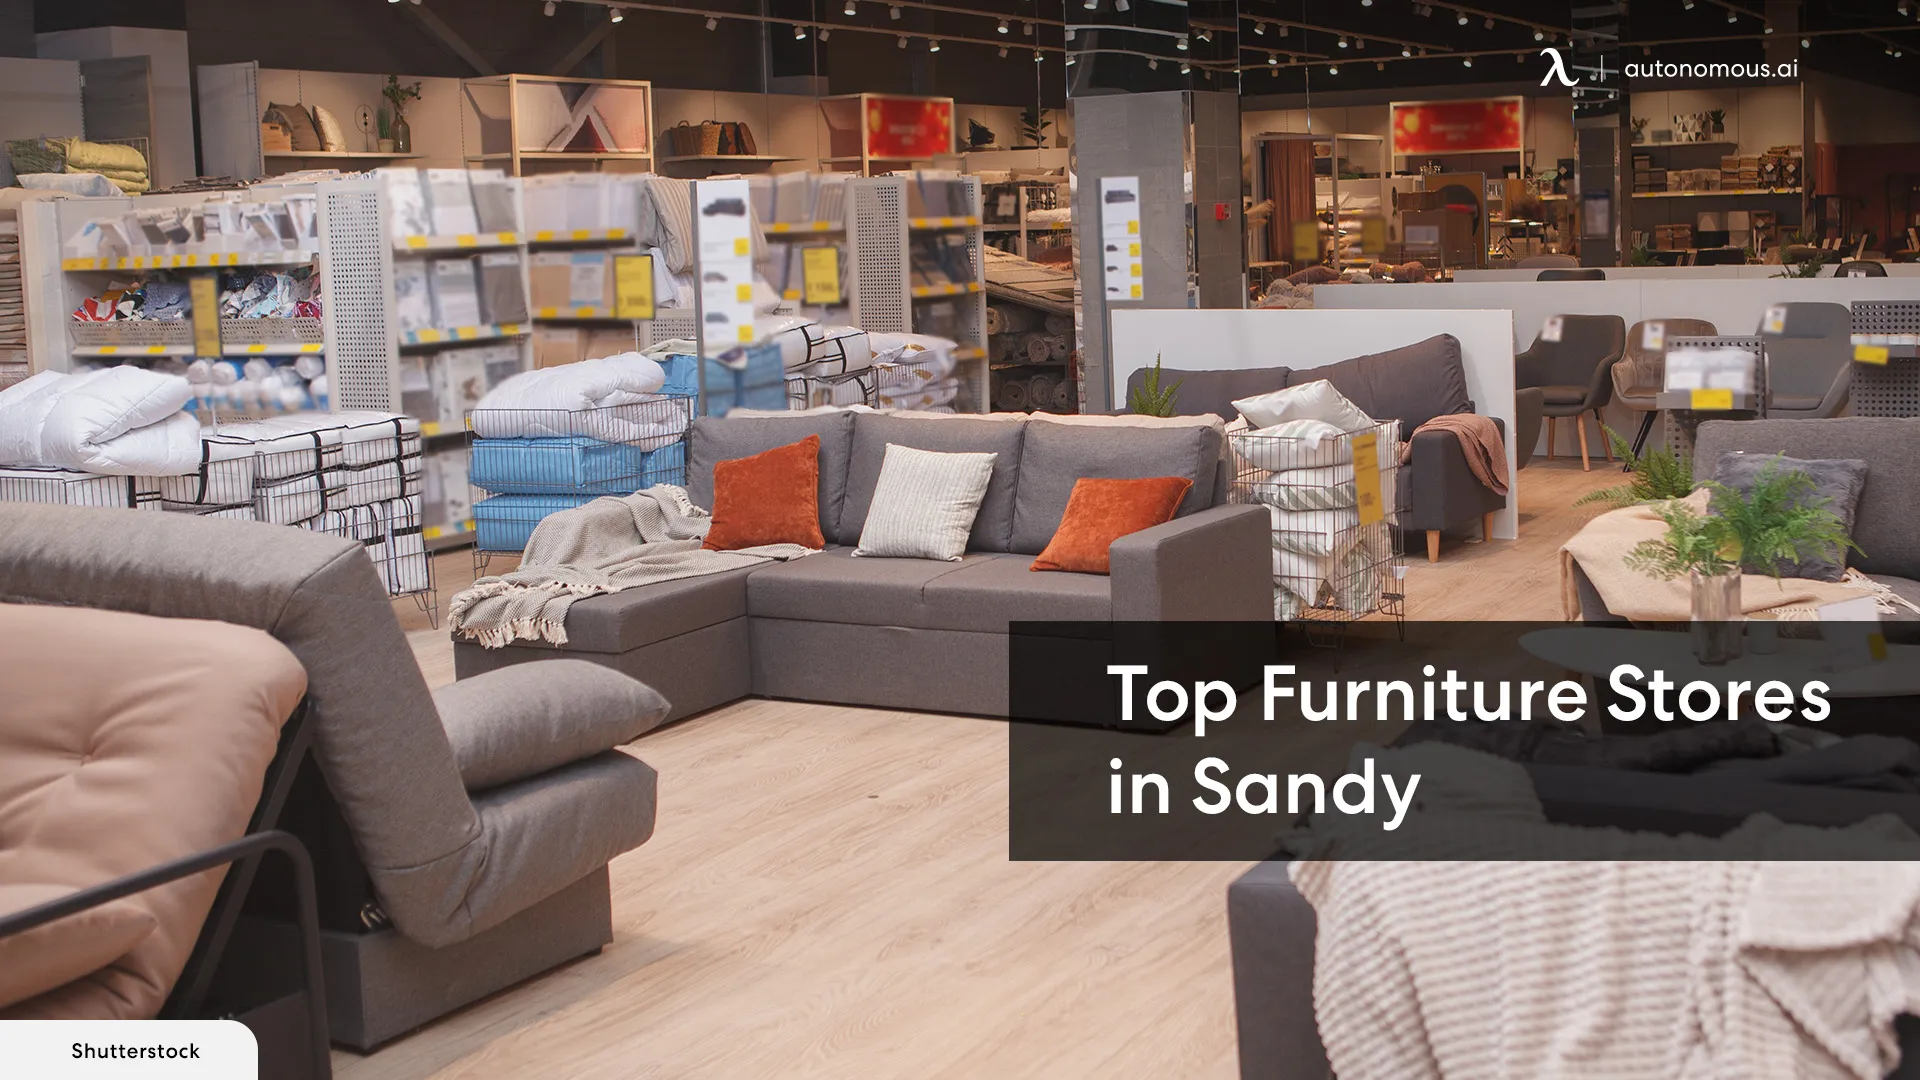 Best Furniture Stores in Sandy Utah for Stylish Working & Living